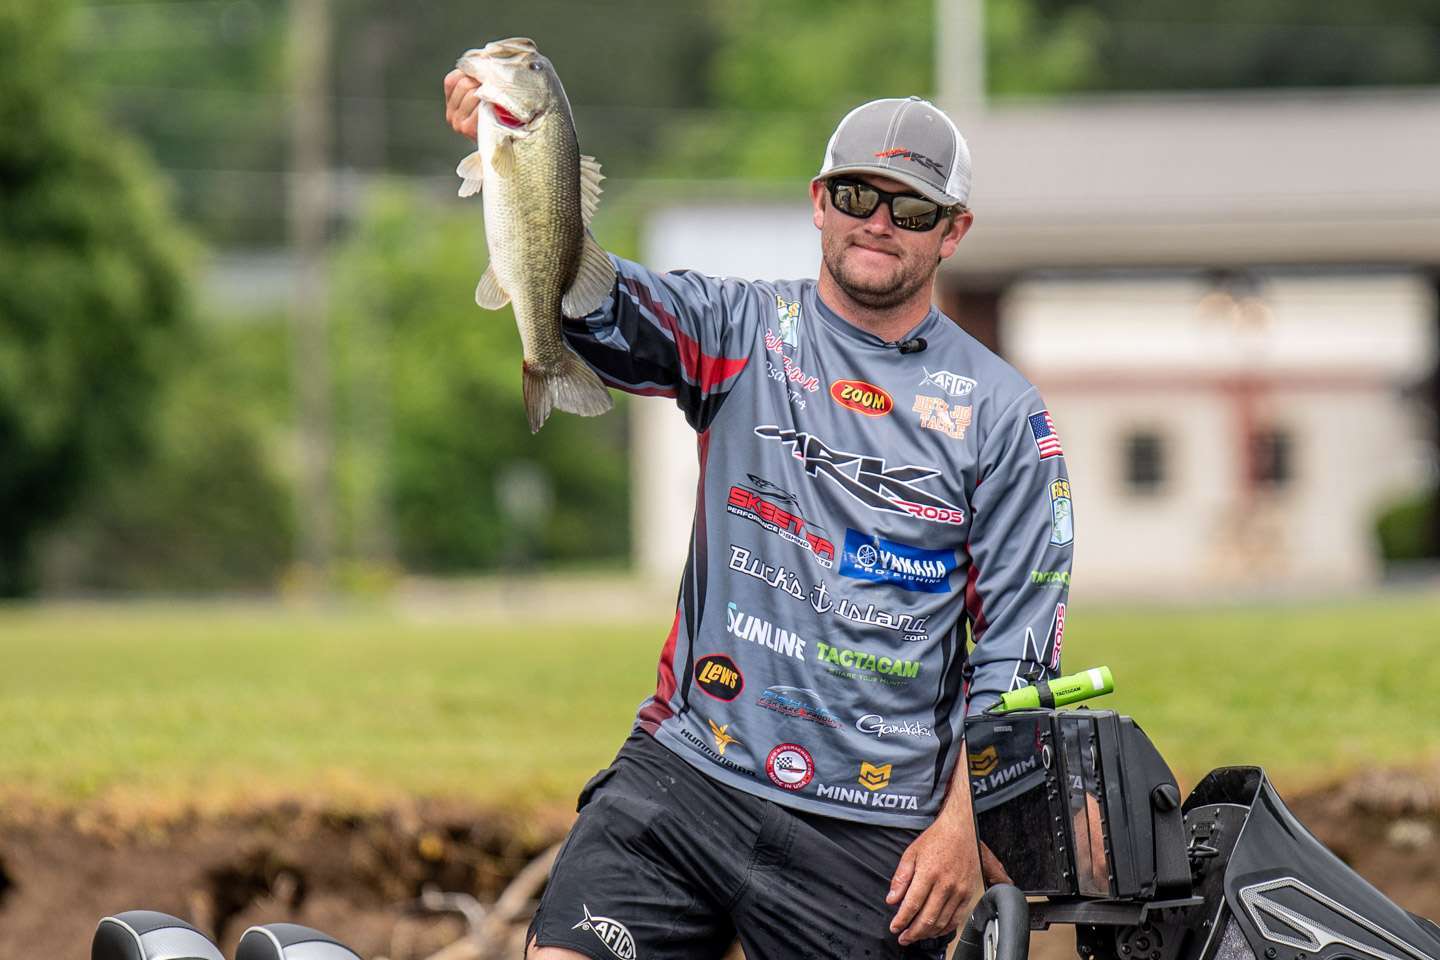 <b>Wes Logan</b><br />
Qualified via the 2021 Bassmaster Elite Series<br />
” class=”wp-image-567983″ width=”1440″ height=”960″/><figcaption><b>Wes Logan</b><br />
Qualified via the 2021 Bassmaster Elite Series<br />
</figcaption></figure>
<figure class=